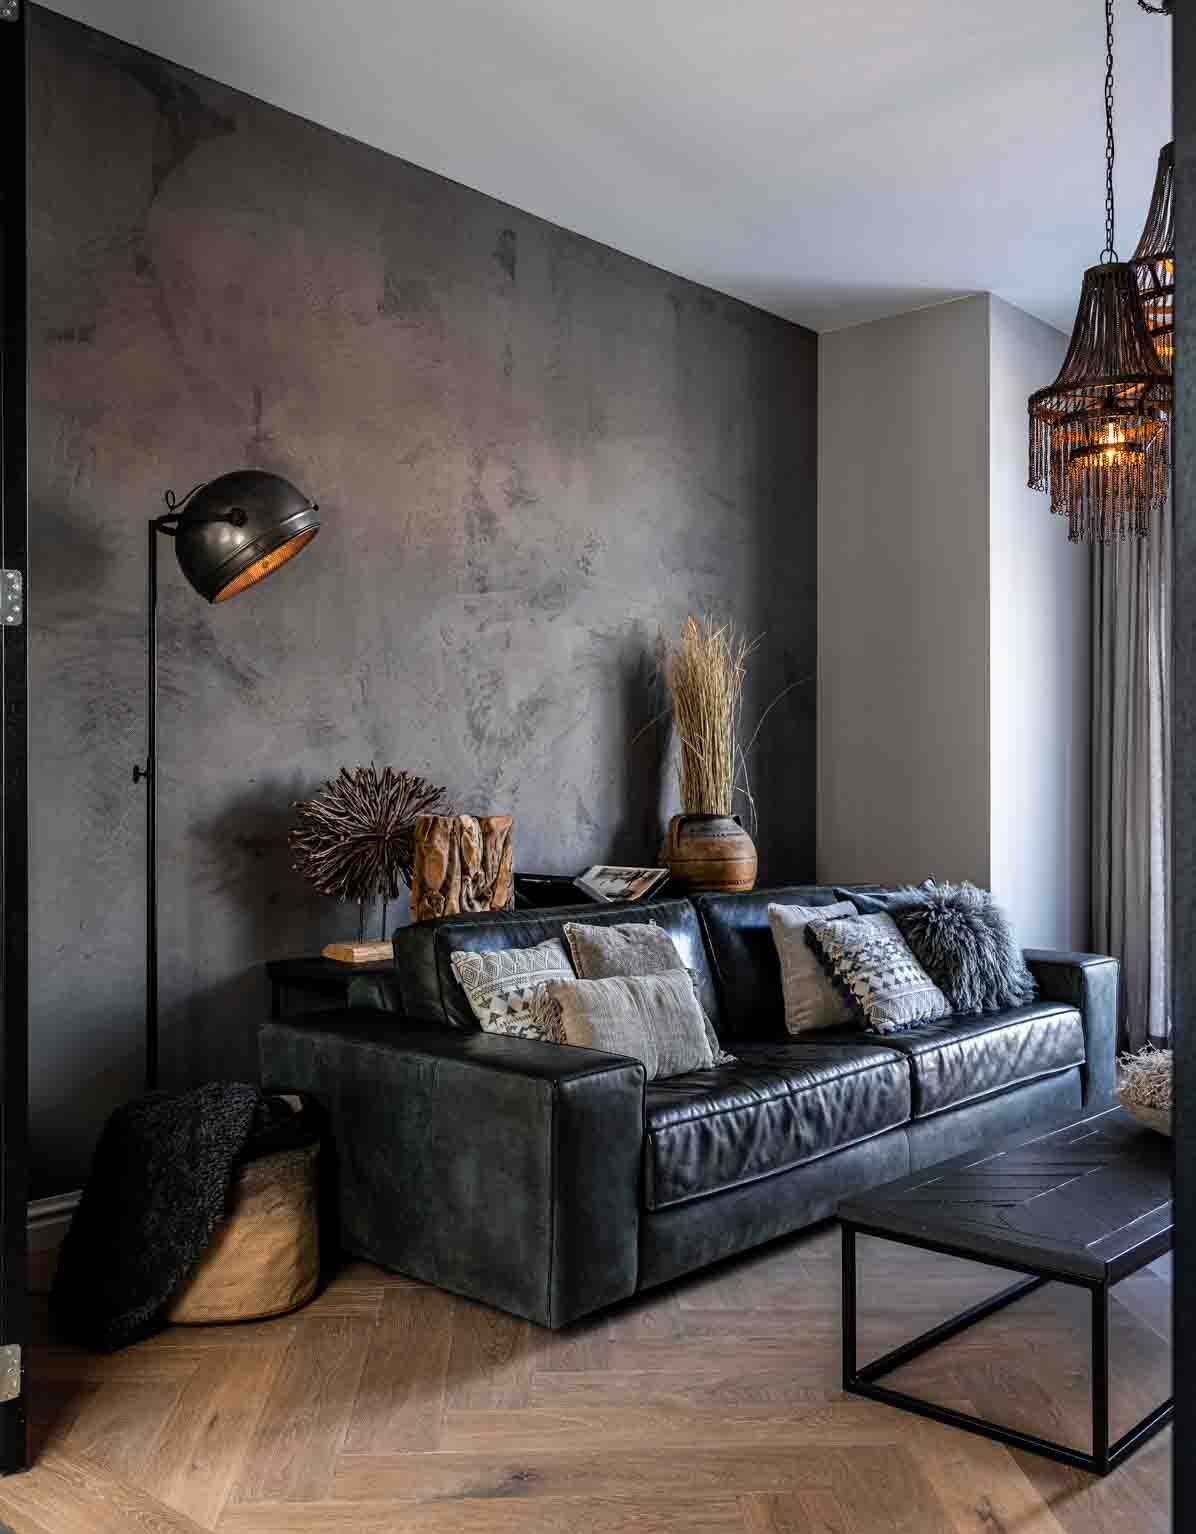 Concrete Wall Accent for An Industrial Design